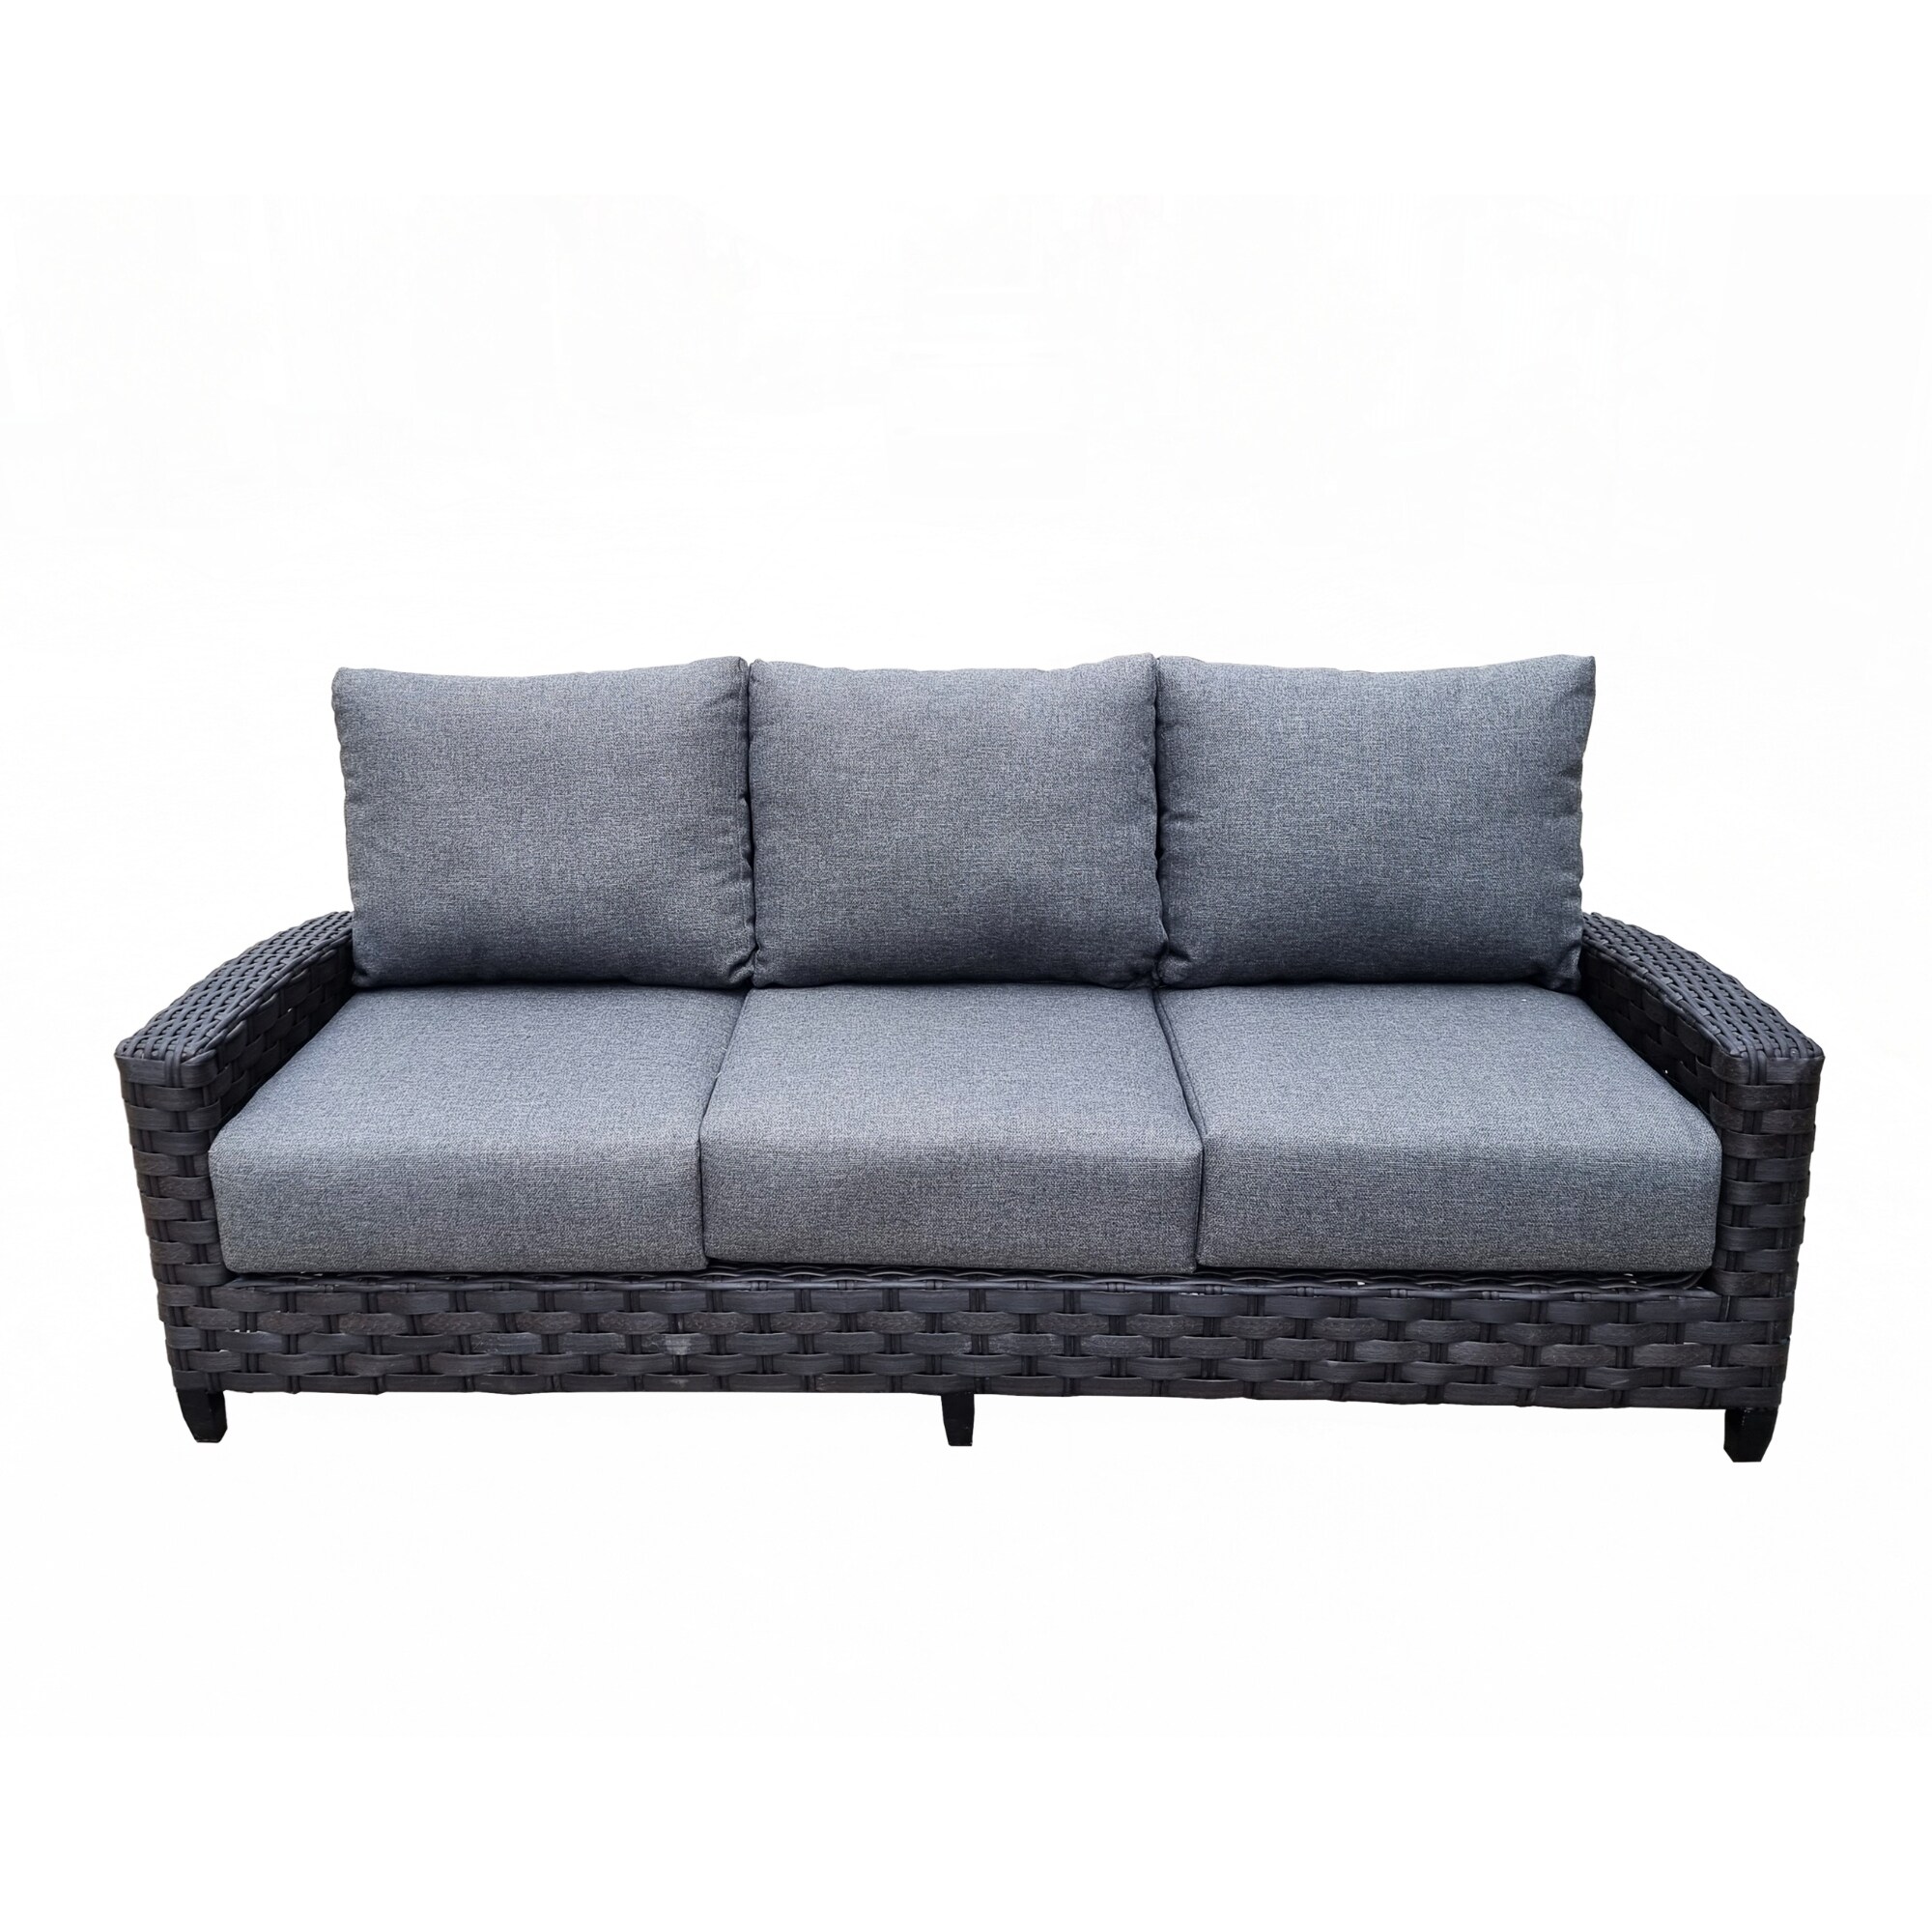 Belize 3-seater Patio Sofa Couch Patio Seating Rattan Wicker Couch With Olefin Cushions - Grey